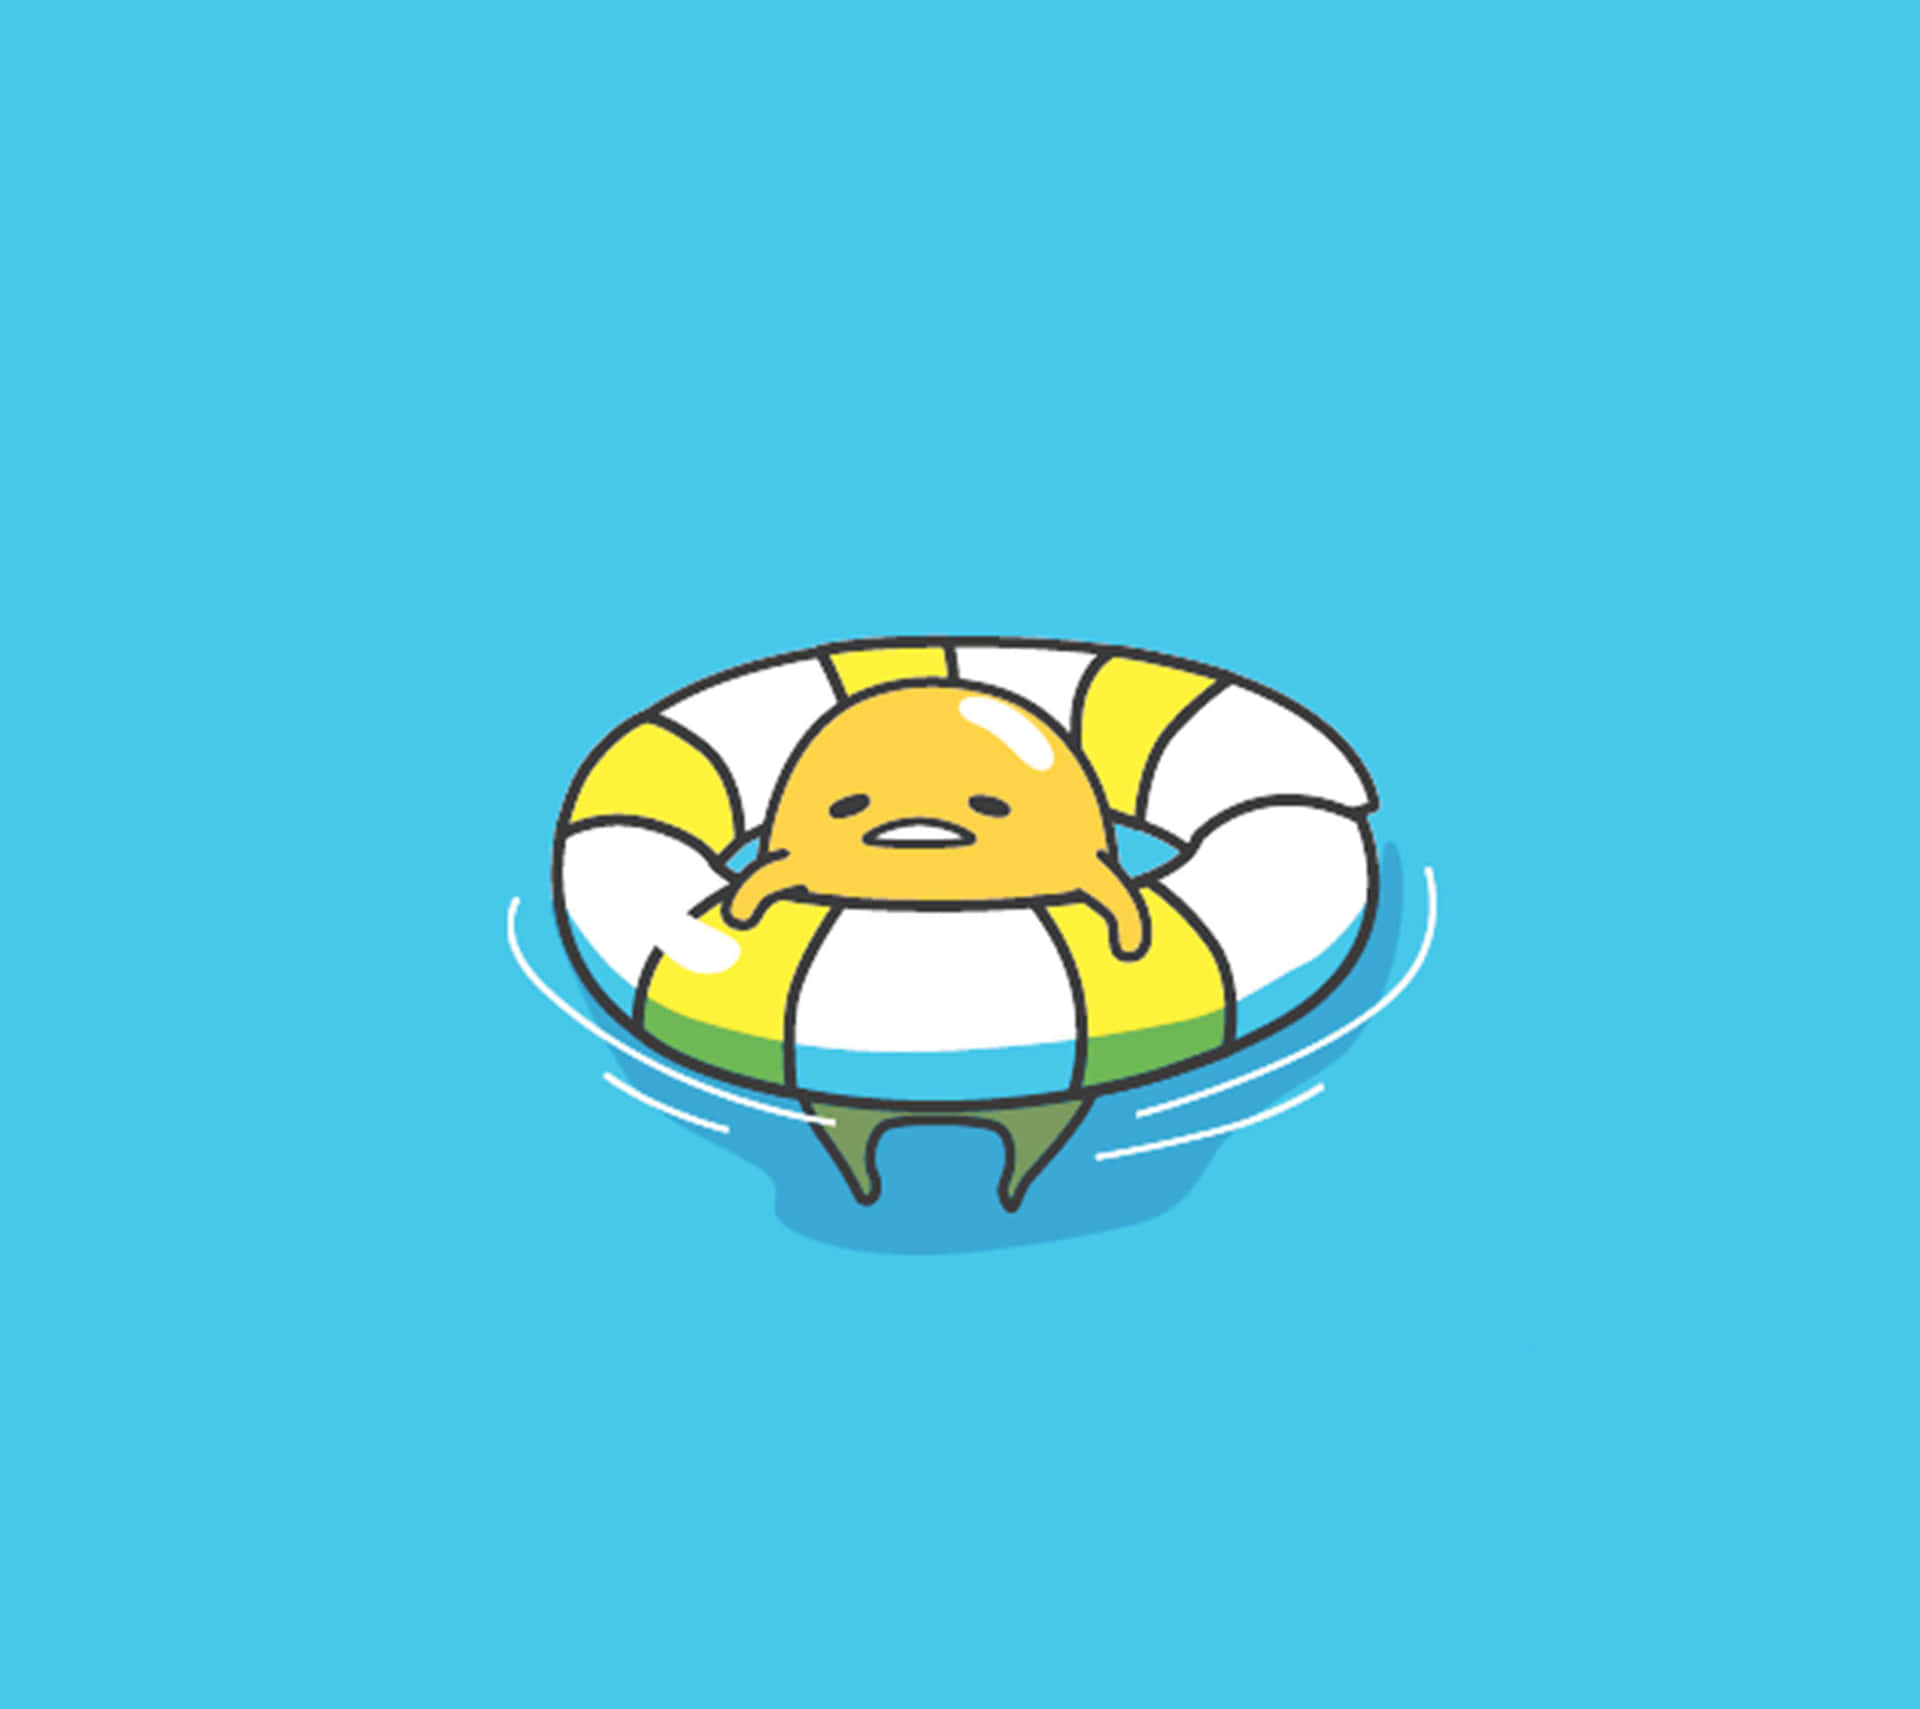 Put your phone away and rest up with Gudetama Wallpaper